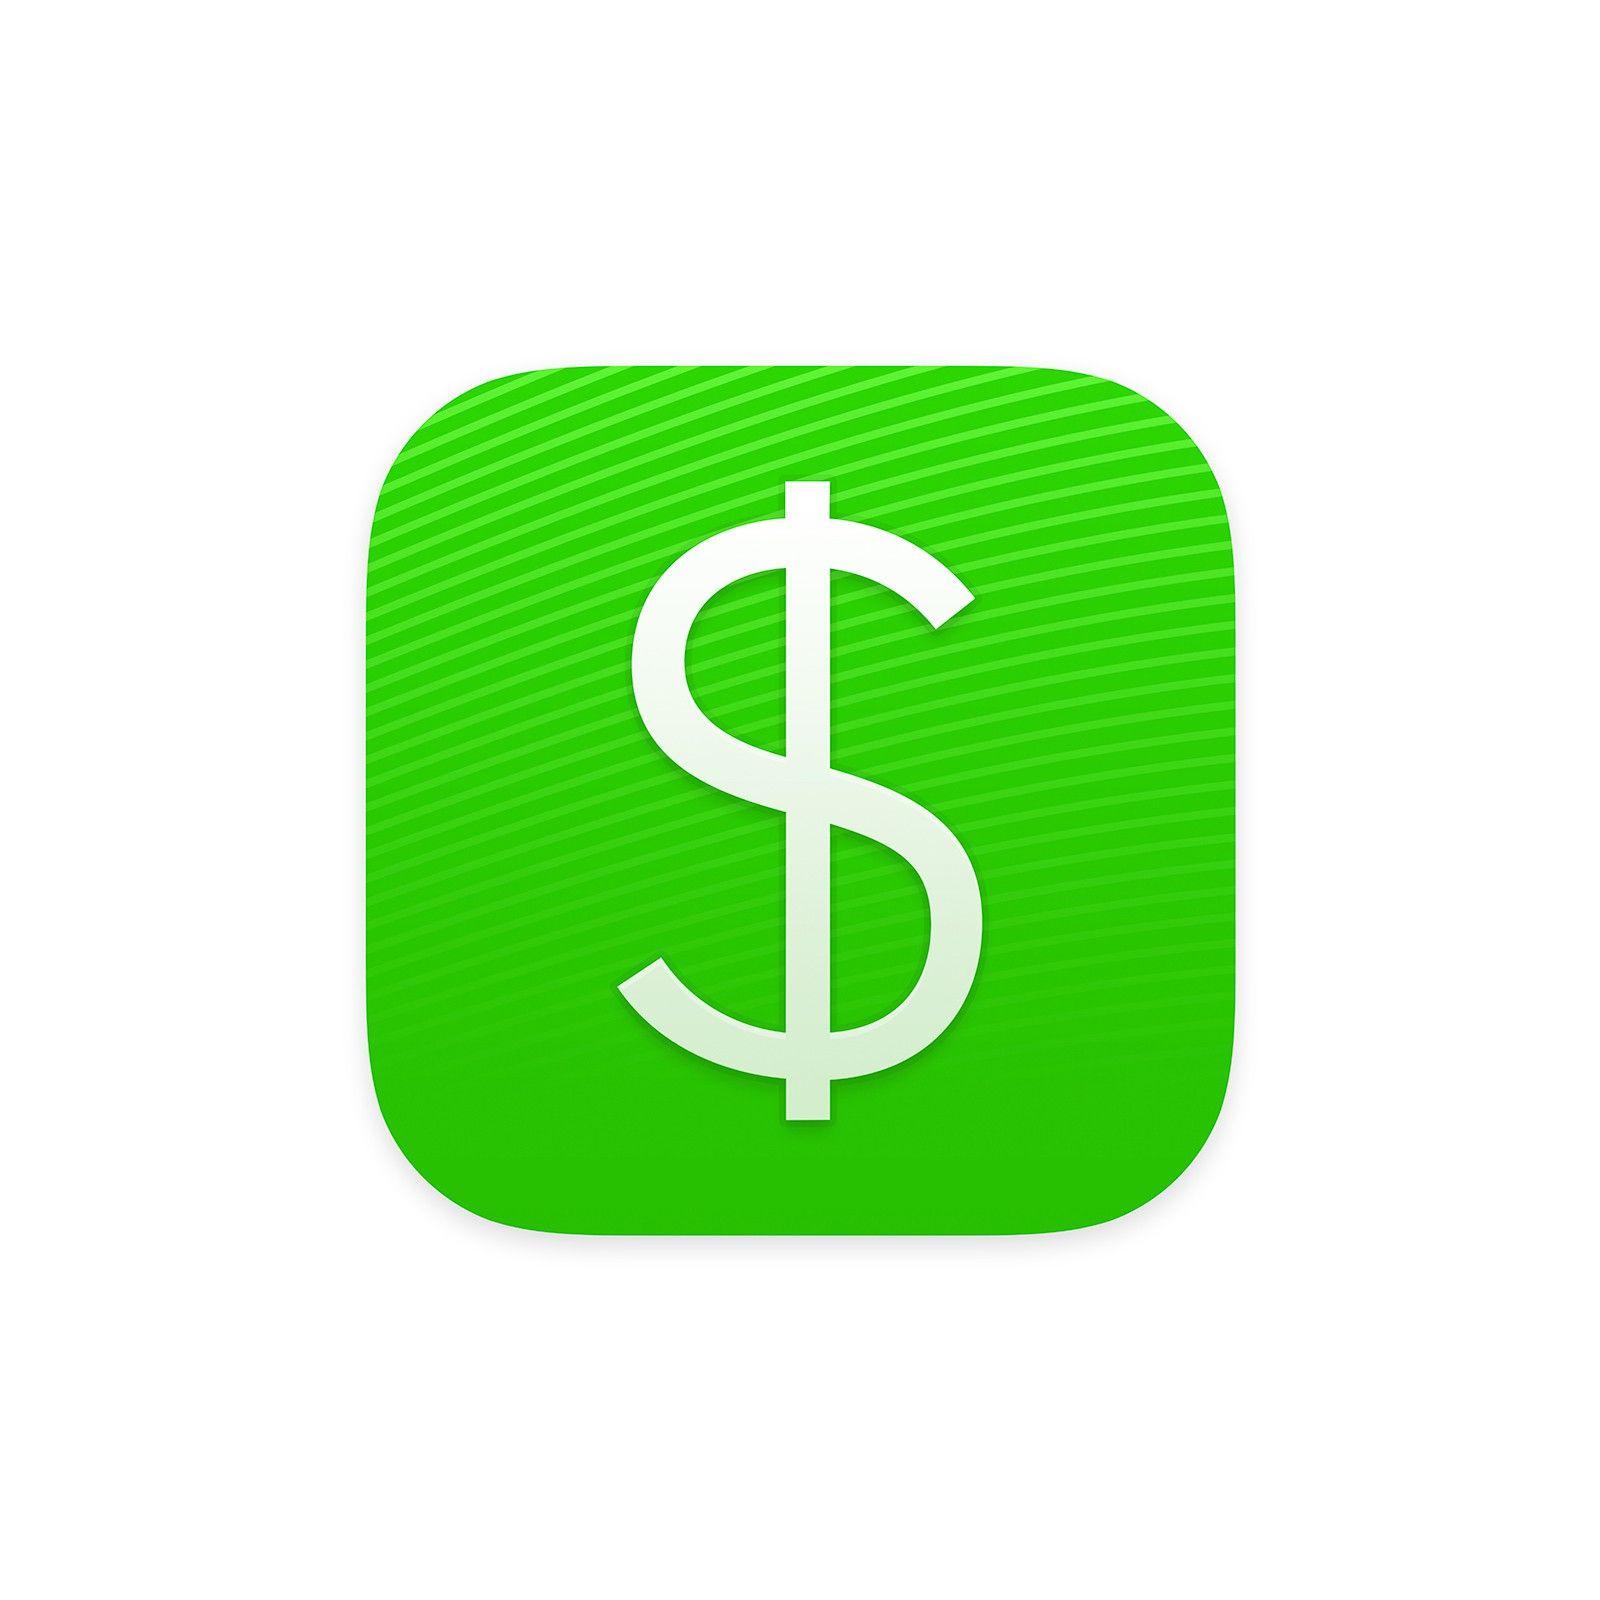 Cash Payment Logo - Square Cash Payment Processing Industry Insight